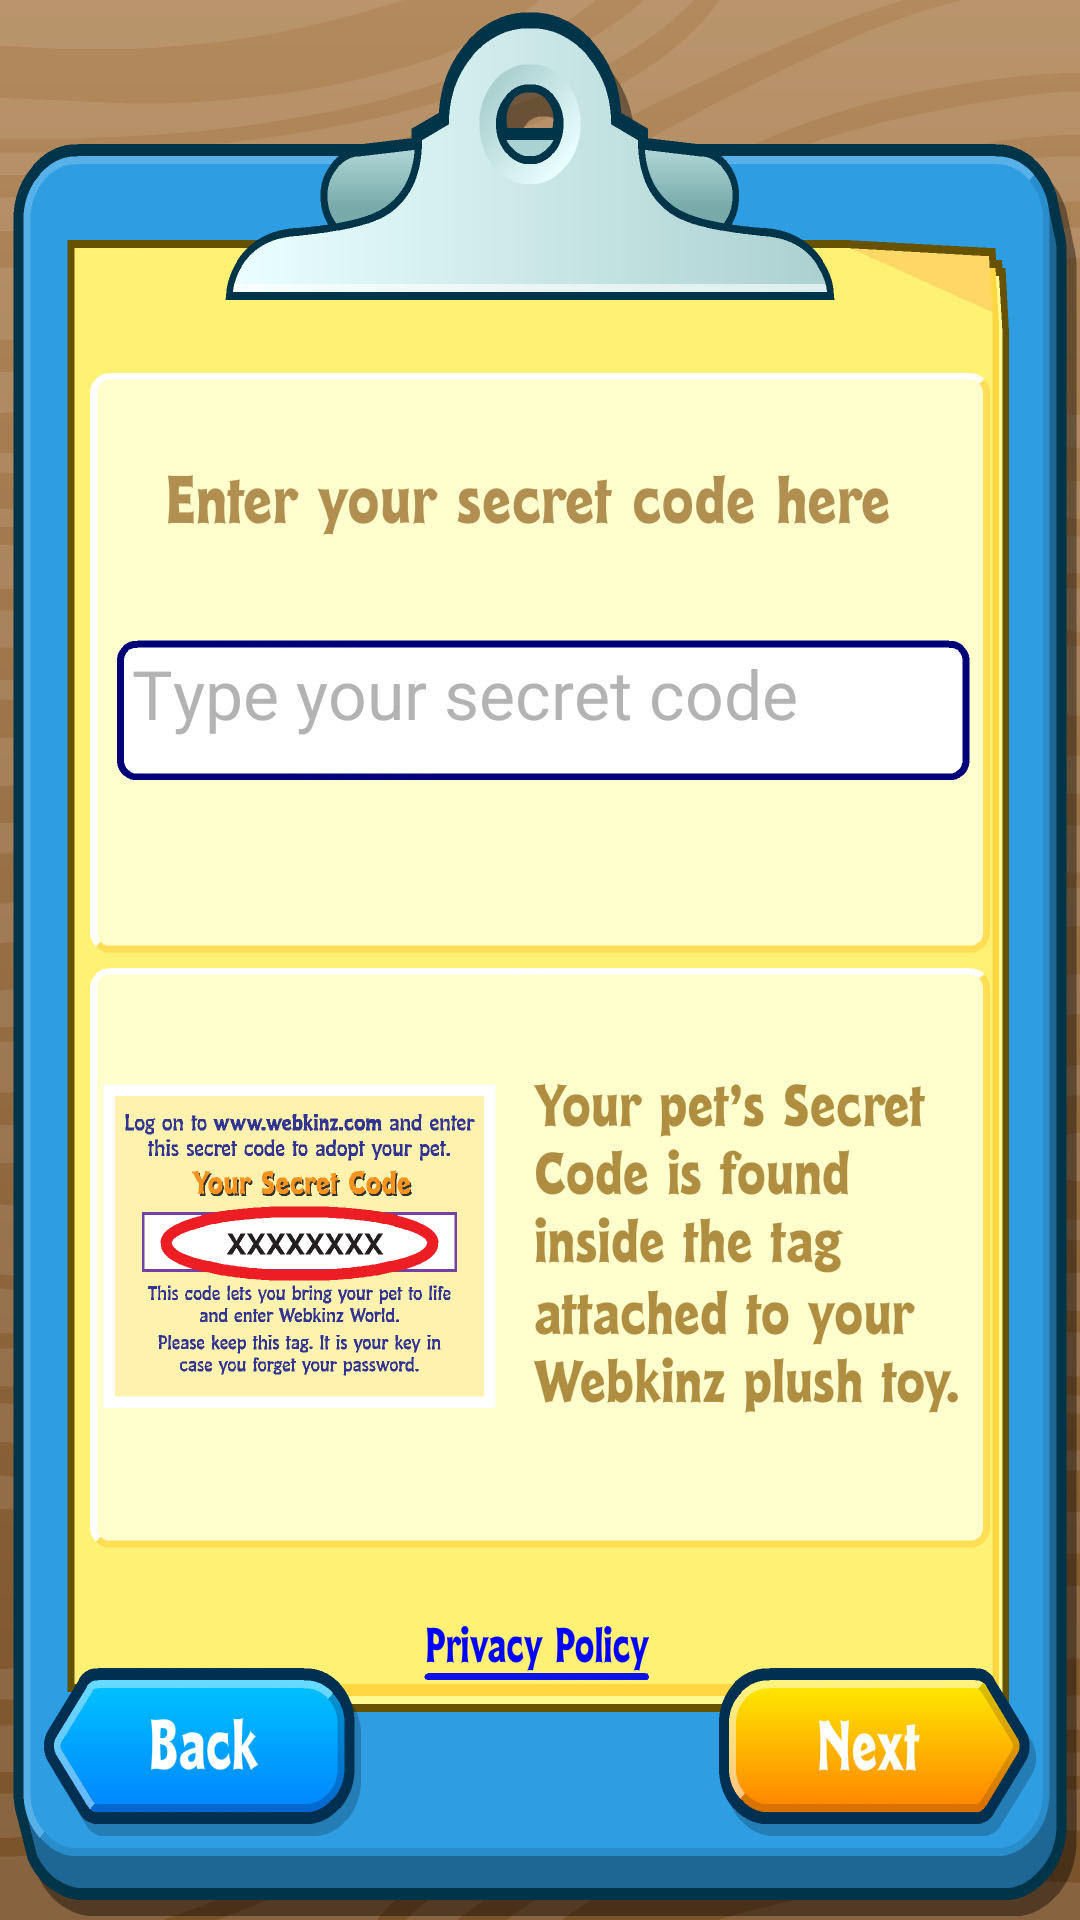 IS THIS A NEW SECRET CODE?